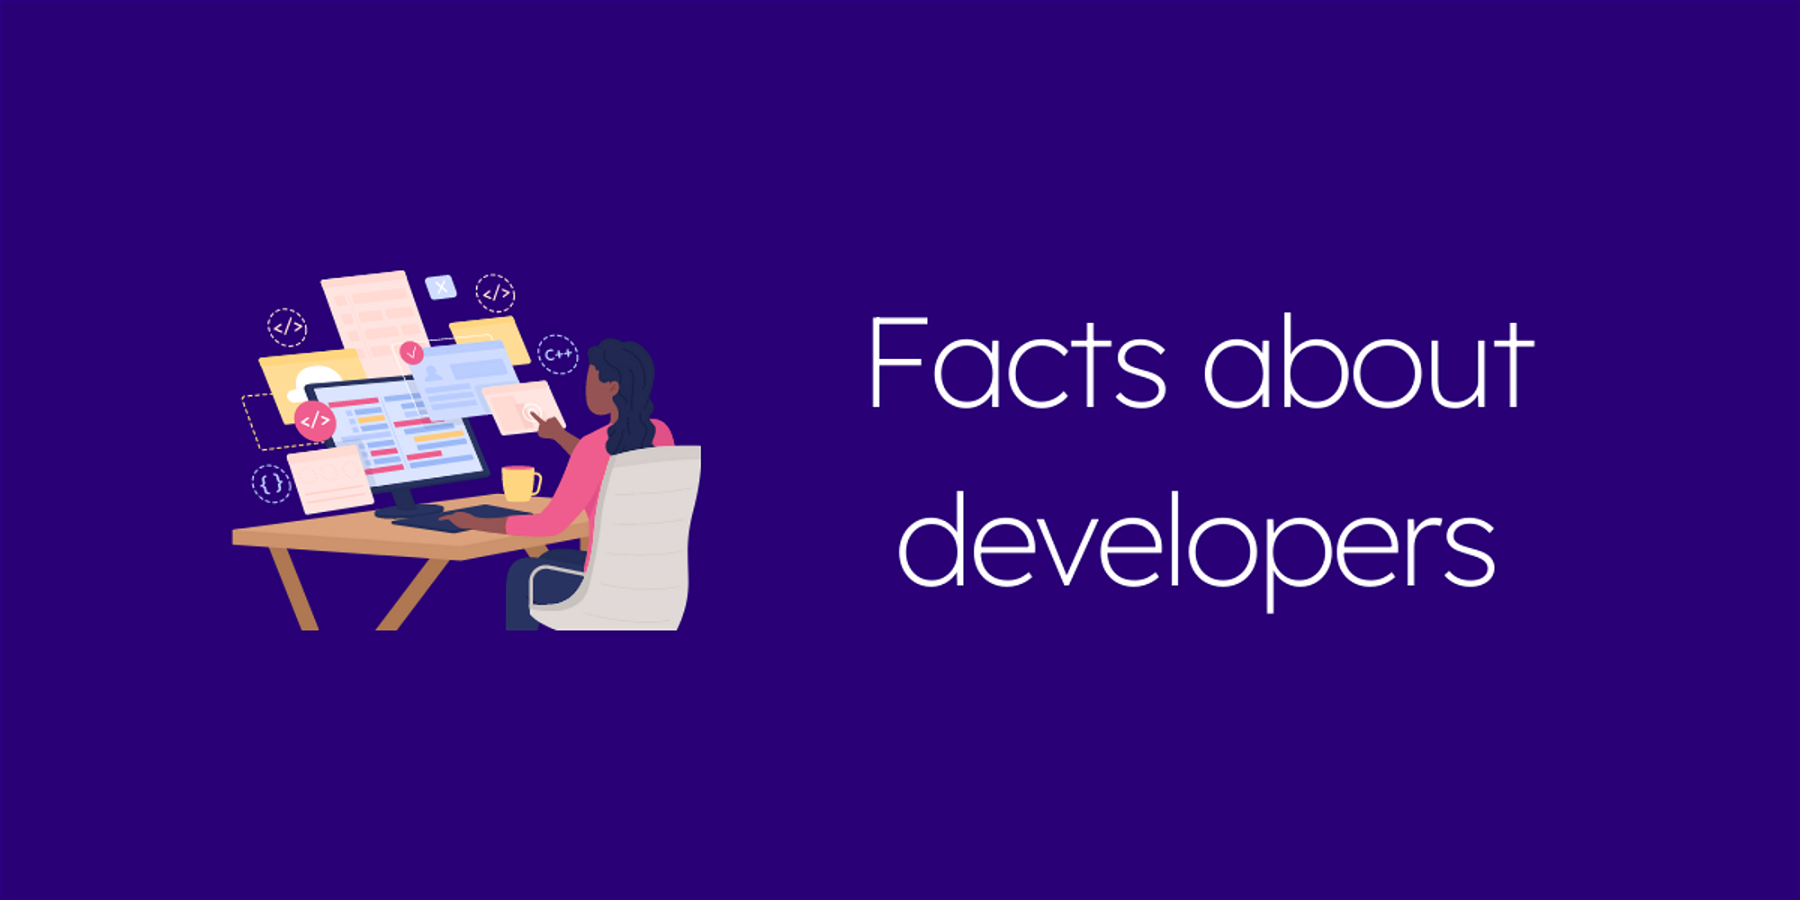 20 things you may not know about software developers